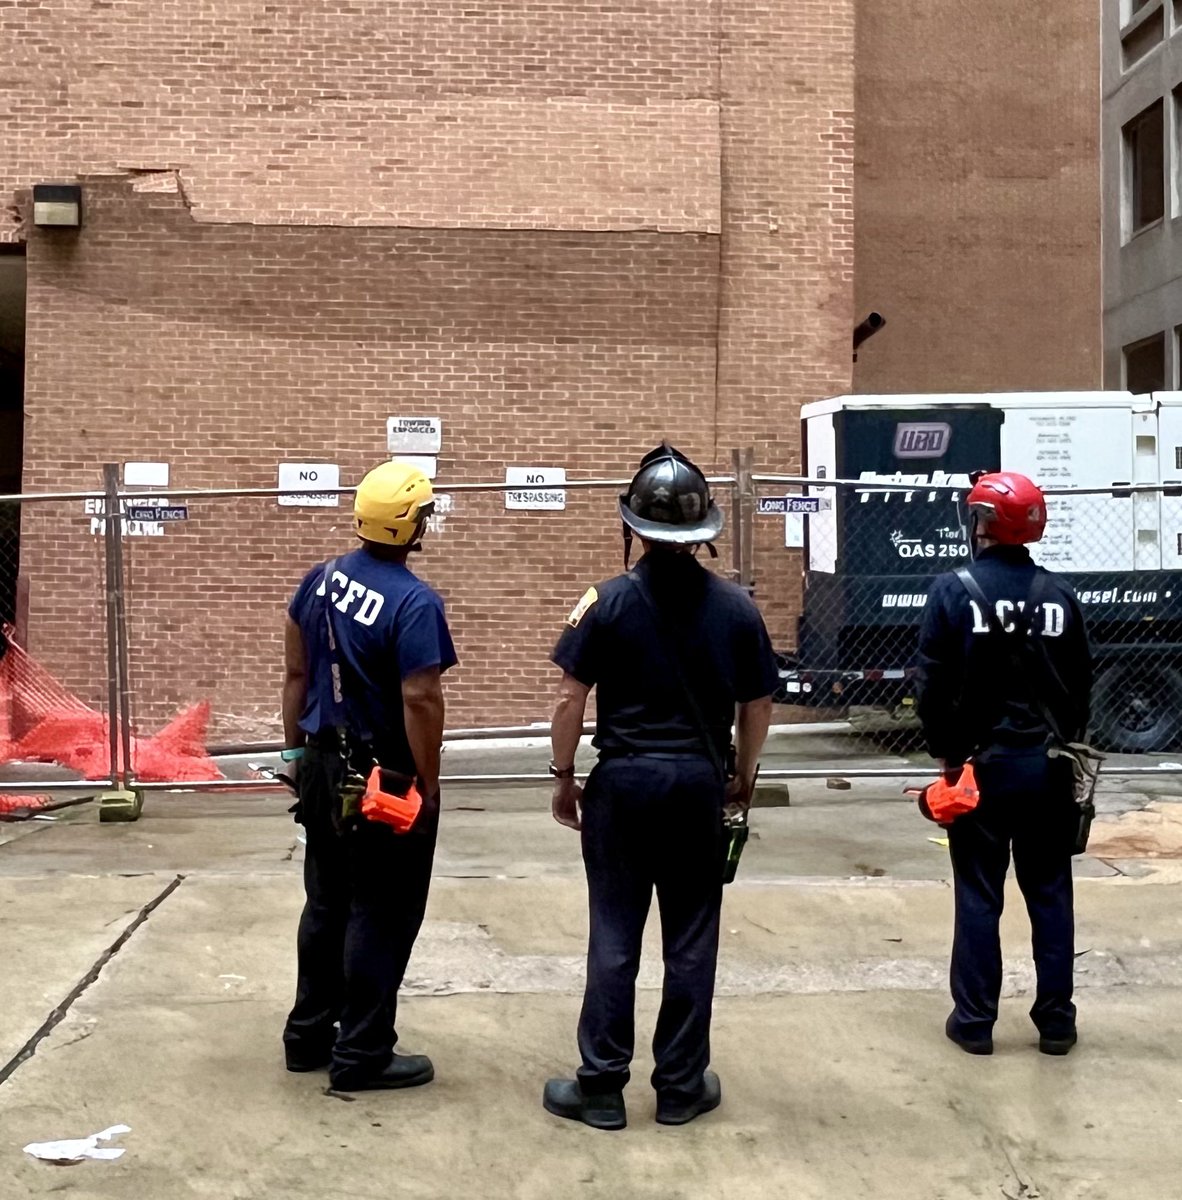 Update structural investigation rear 600 E St NW. The area involved is brick veneer only. Main structure not involved. Area is well fenced off and there is no threat to any adjacent structures. Inspector from @DC_DOB on scene. Fire and EMS clearing the scene. #DCsBravest